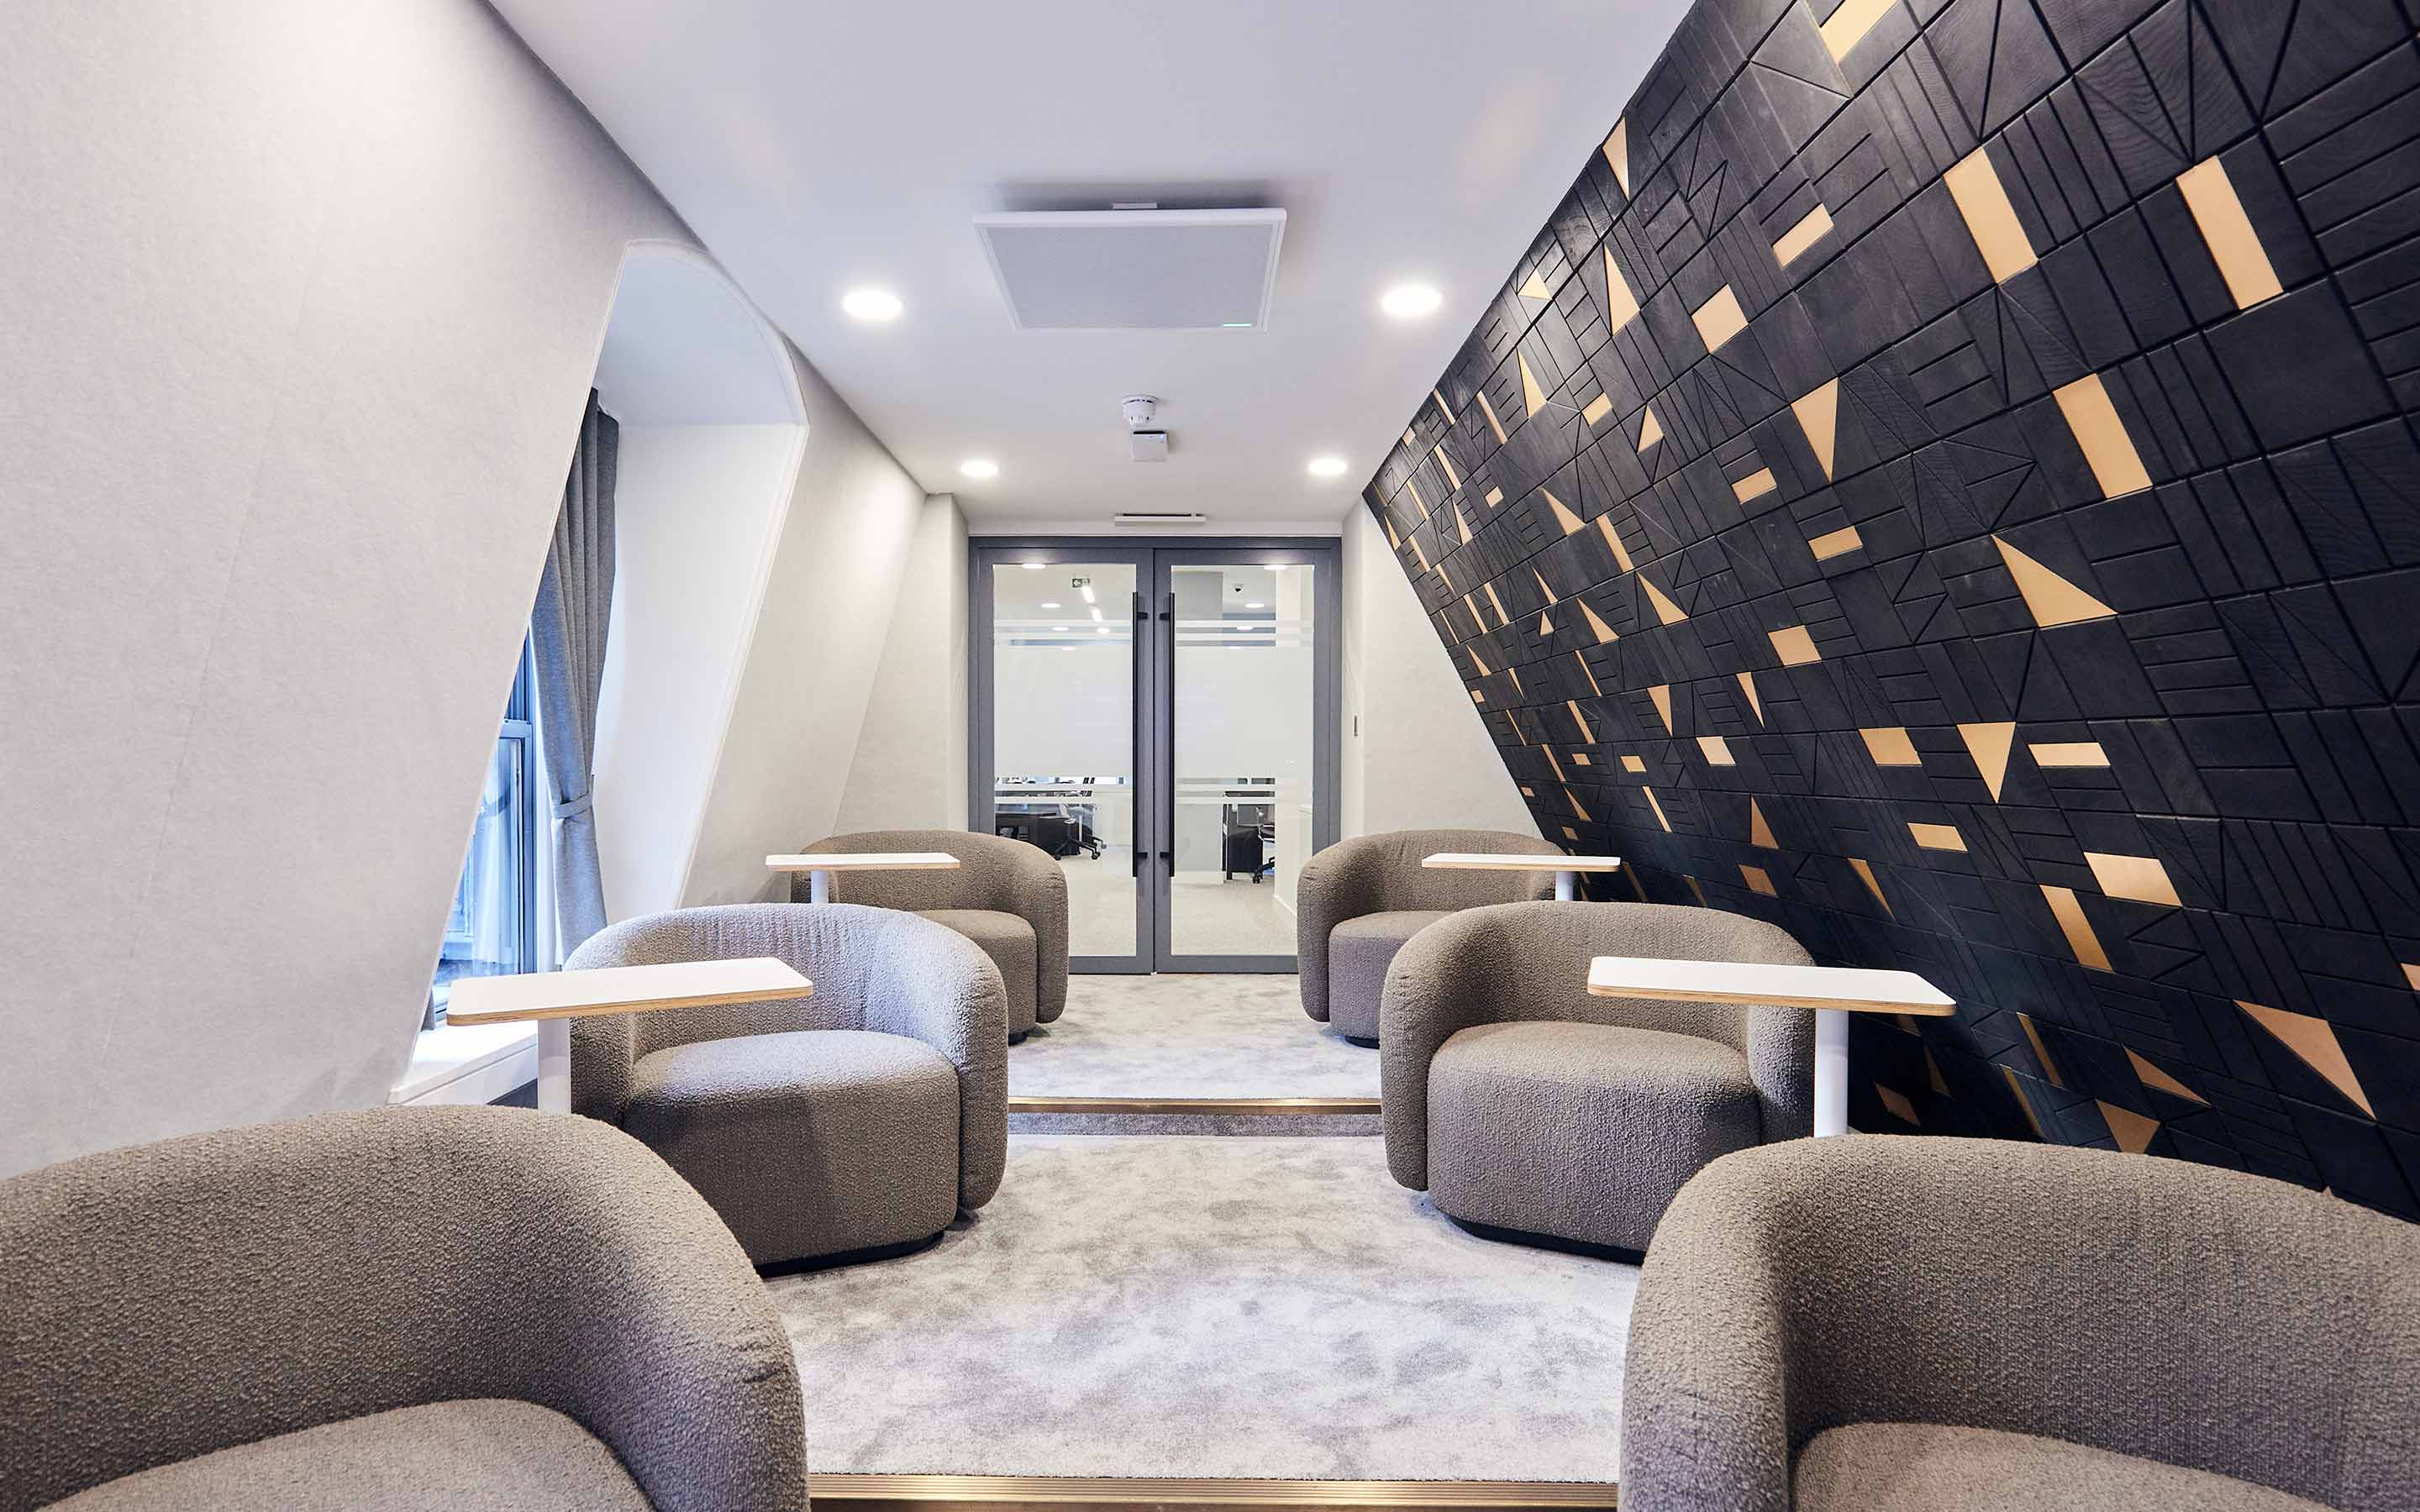 A well-designed office interior with comfortable chairs and tables, incorporating modern workplace aesthetics and a distinctive black wooden joinery wall